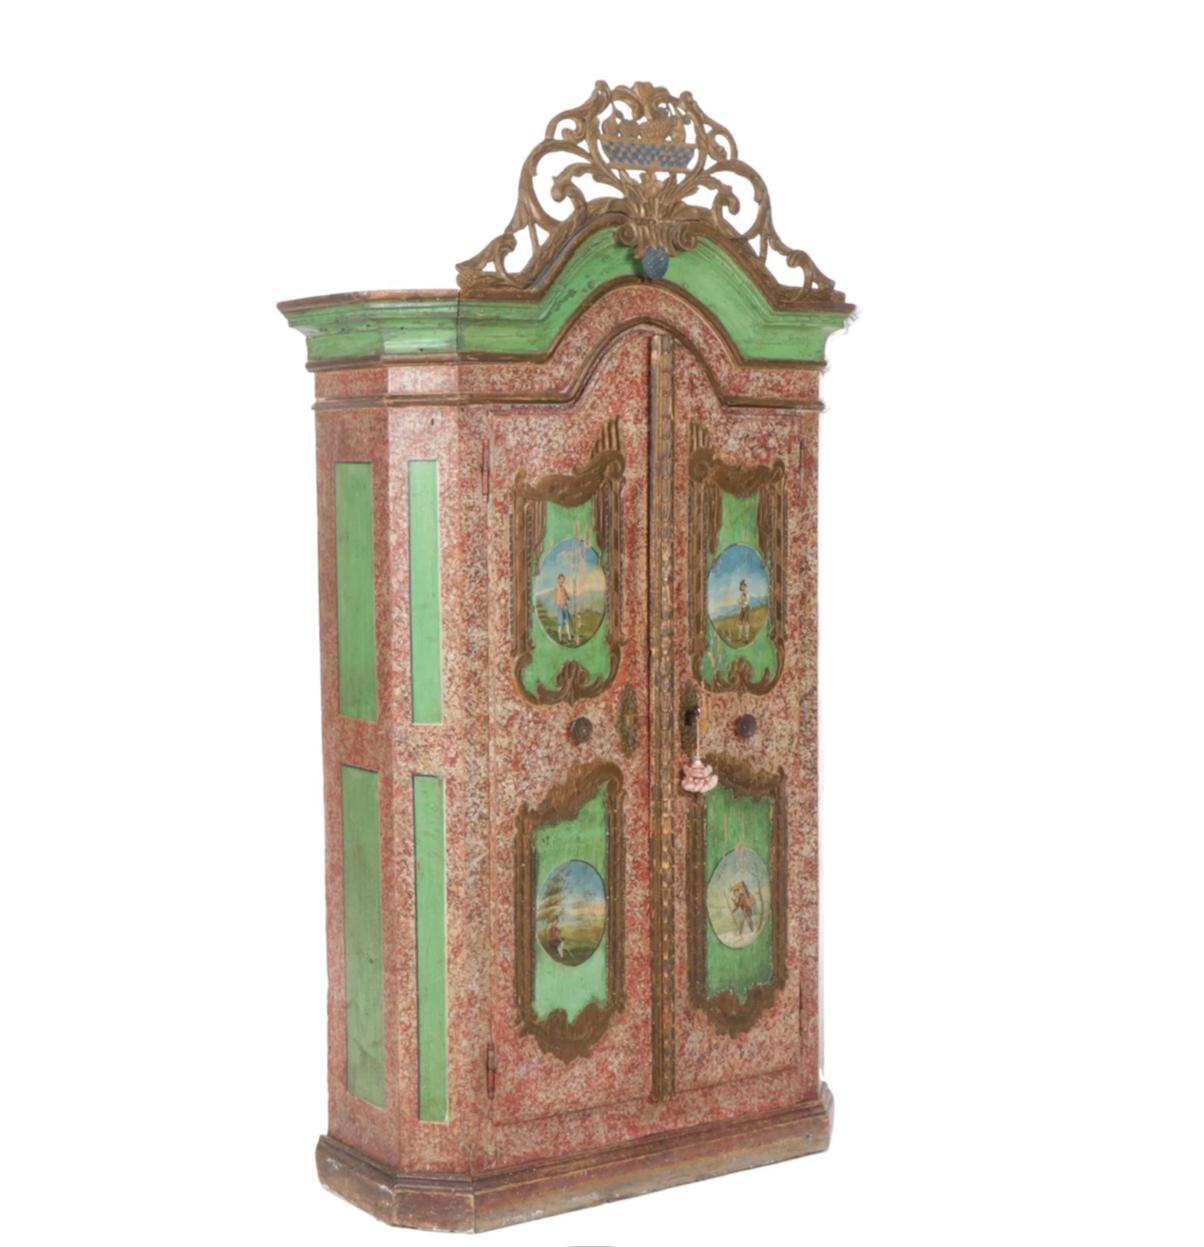 Antique Bavarian hand-painted alpine schrank cabinet, armoir, early 18th c. Lovely hand-painted Alpine scenes. Polychromed. 

Each door has two painted vignettes of Alpine life framed by a carved cartouche. Schrank, a tall wardrobe-like German